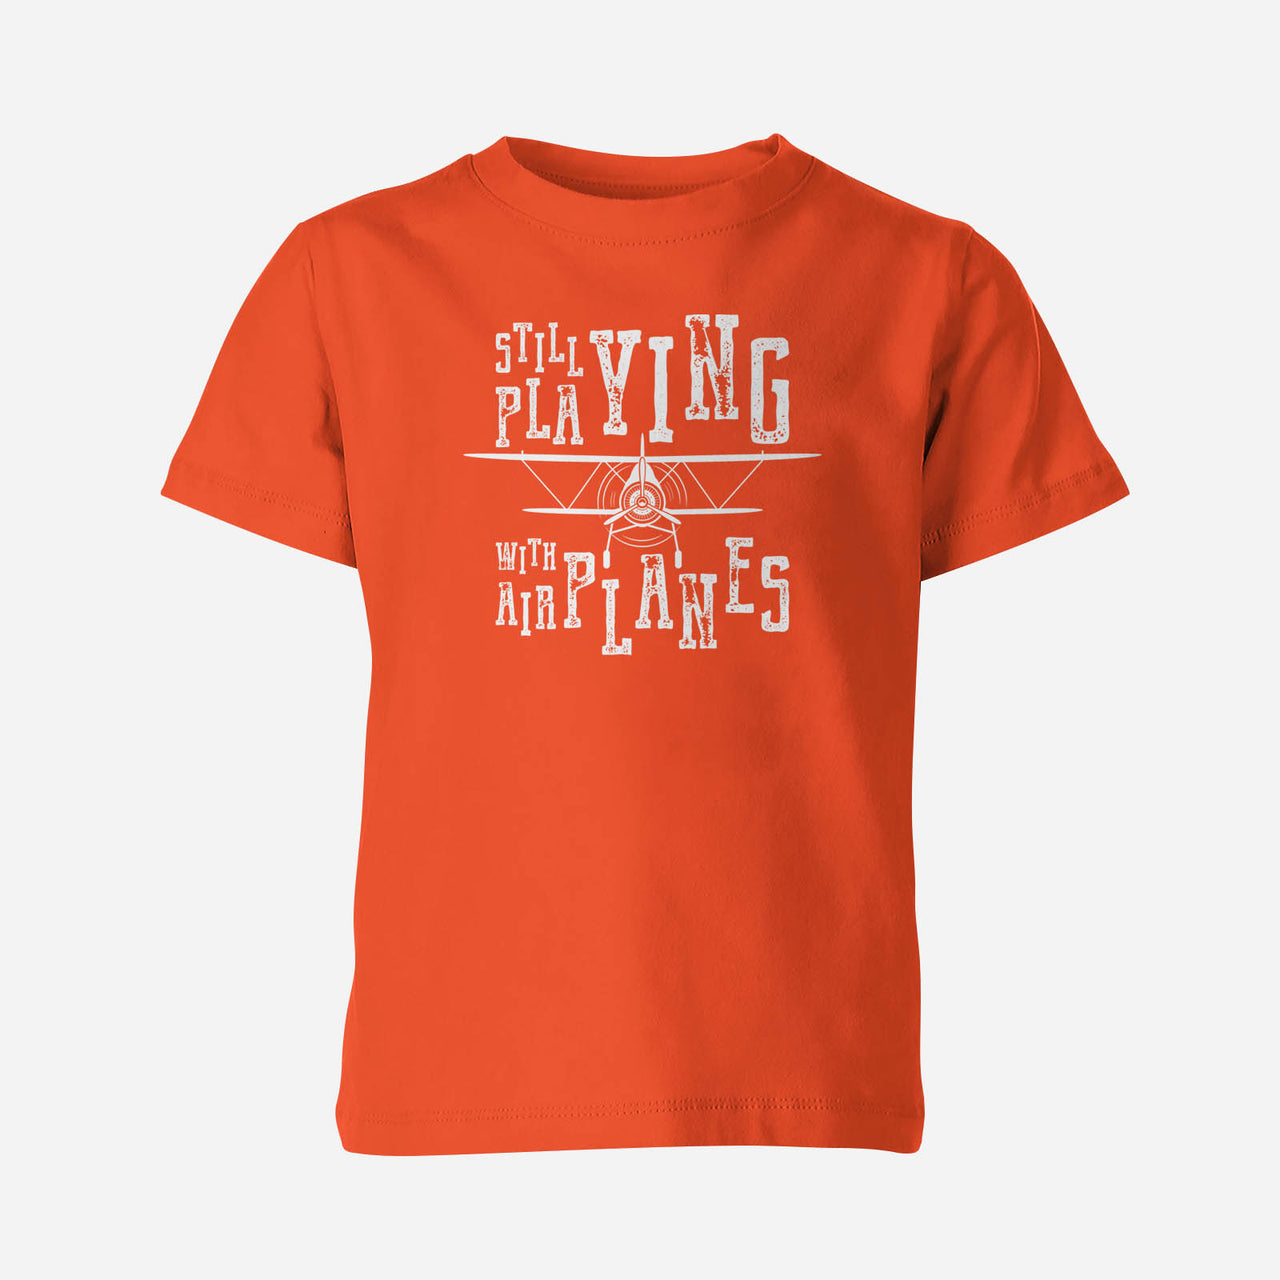 Still Playing With Airplanes Designed Children T-Shirts